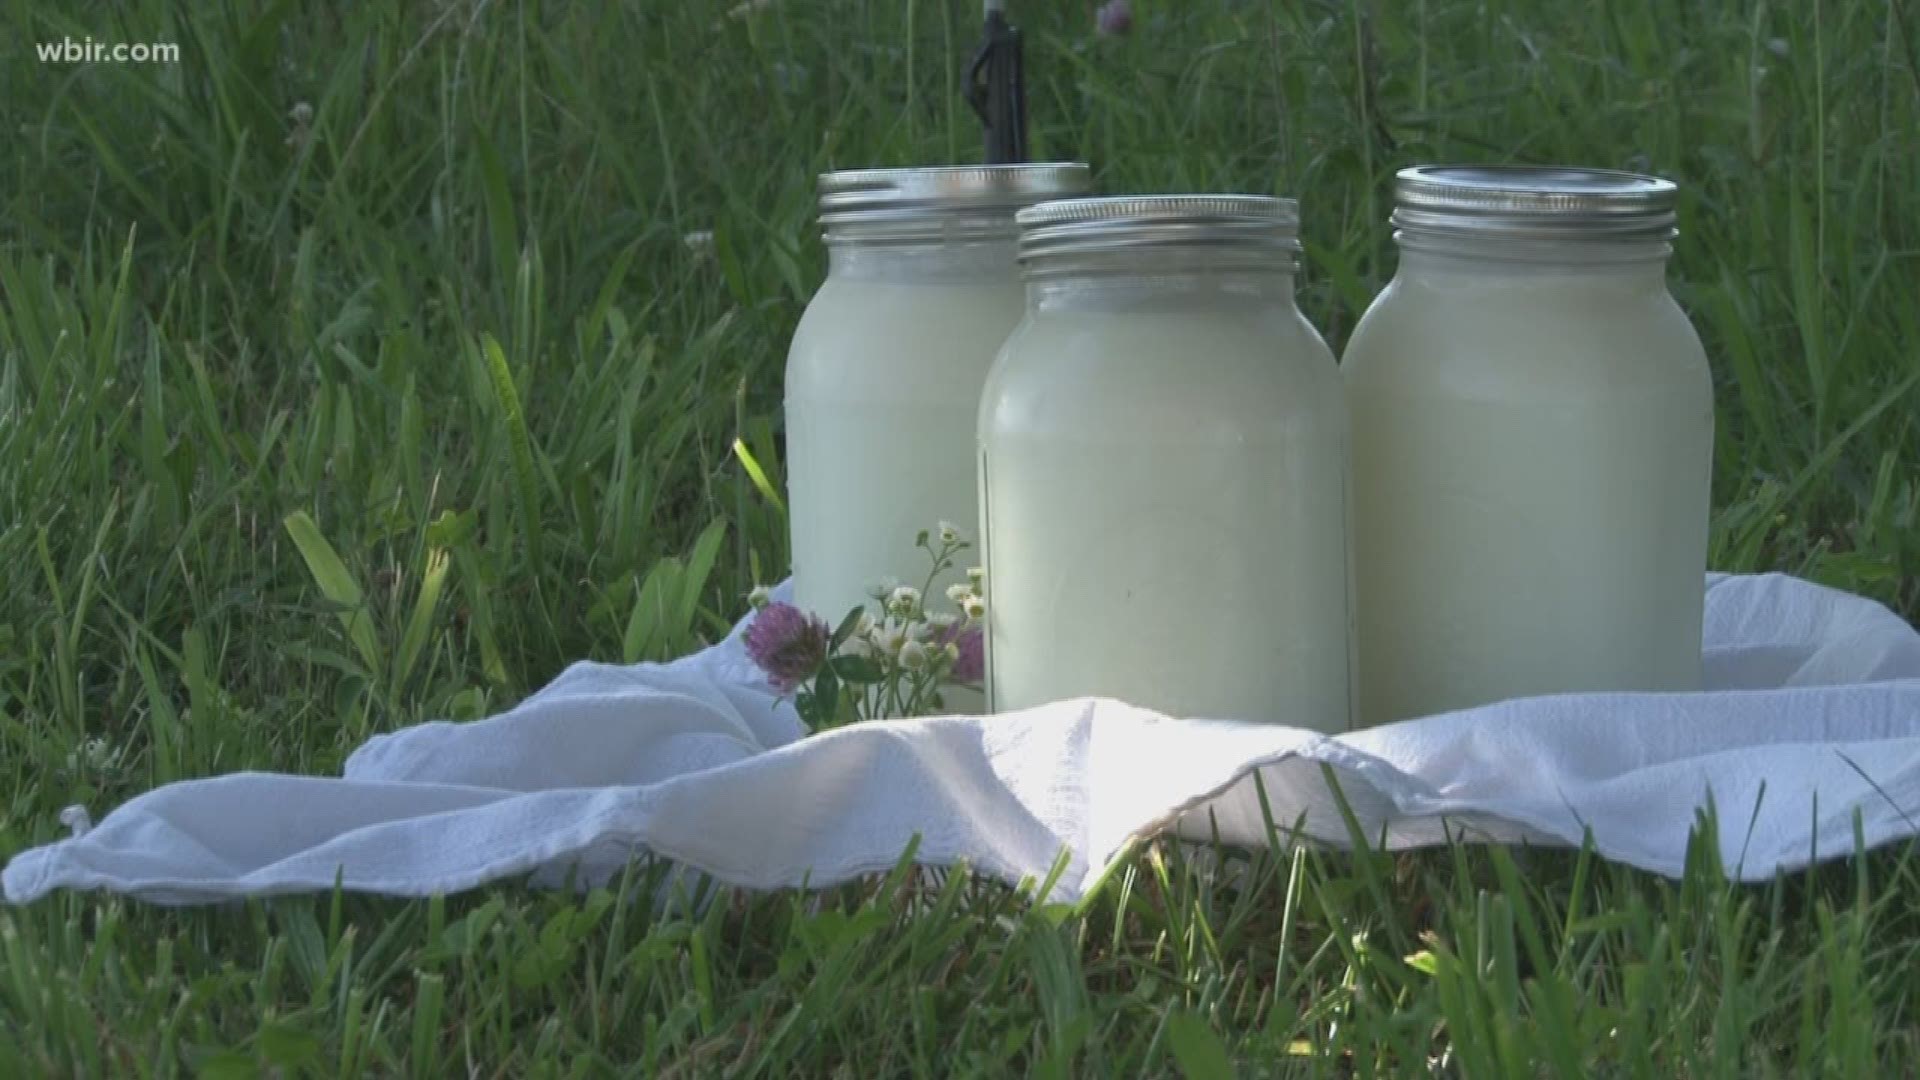 A dozen kids have been treated for E coli in the last few weeks. Health officials say most of them drank raw milk from French Broad Farm. The farm has complied with the investigation and investigators have found no issues.